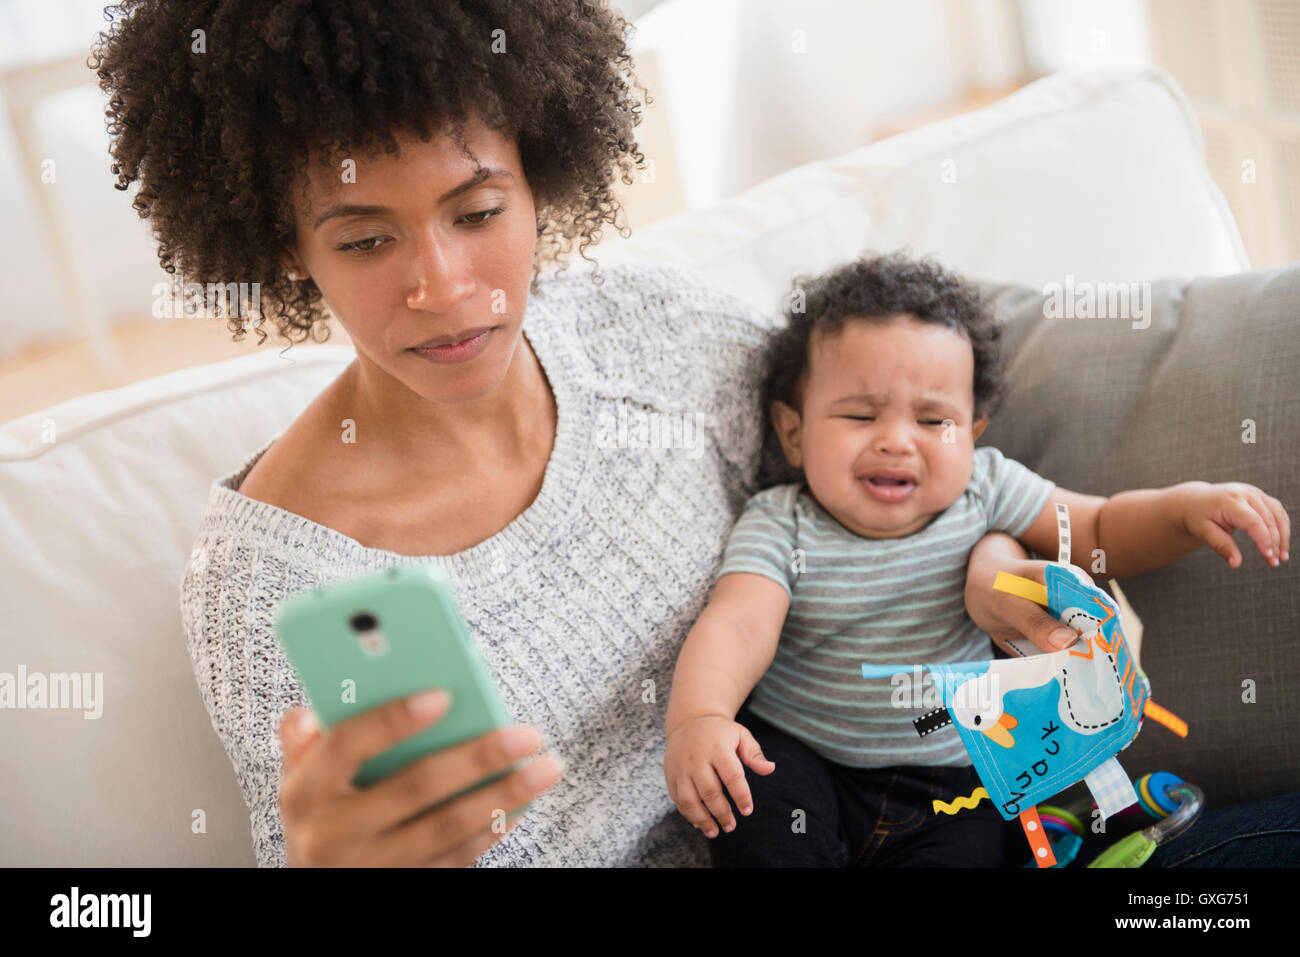 Mother holding crying baby son while texting on cell phone Stock Photo